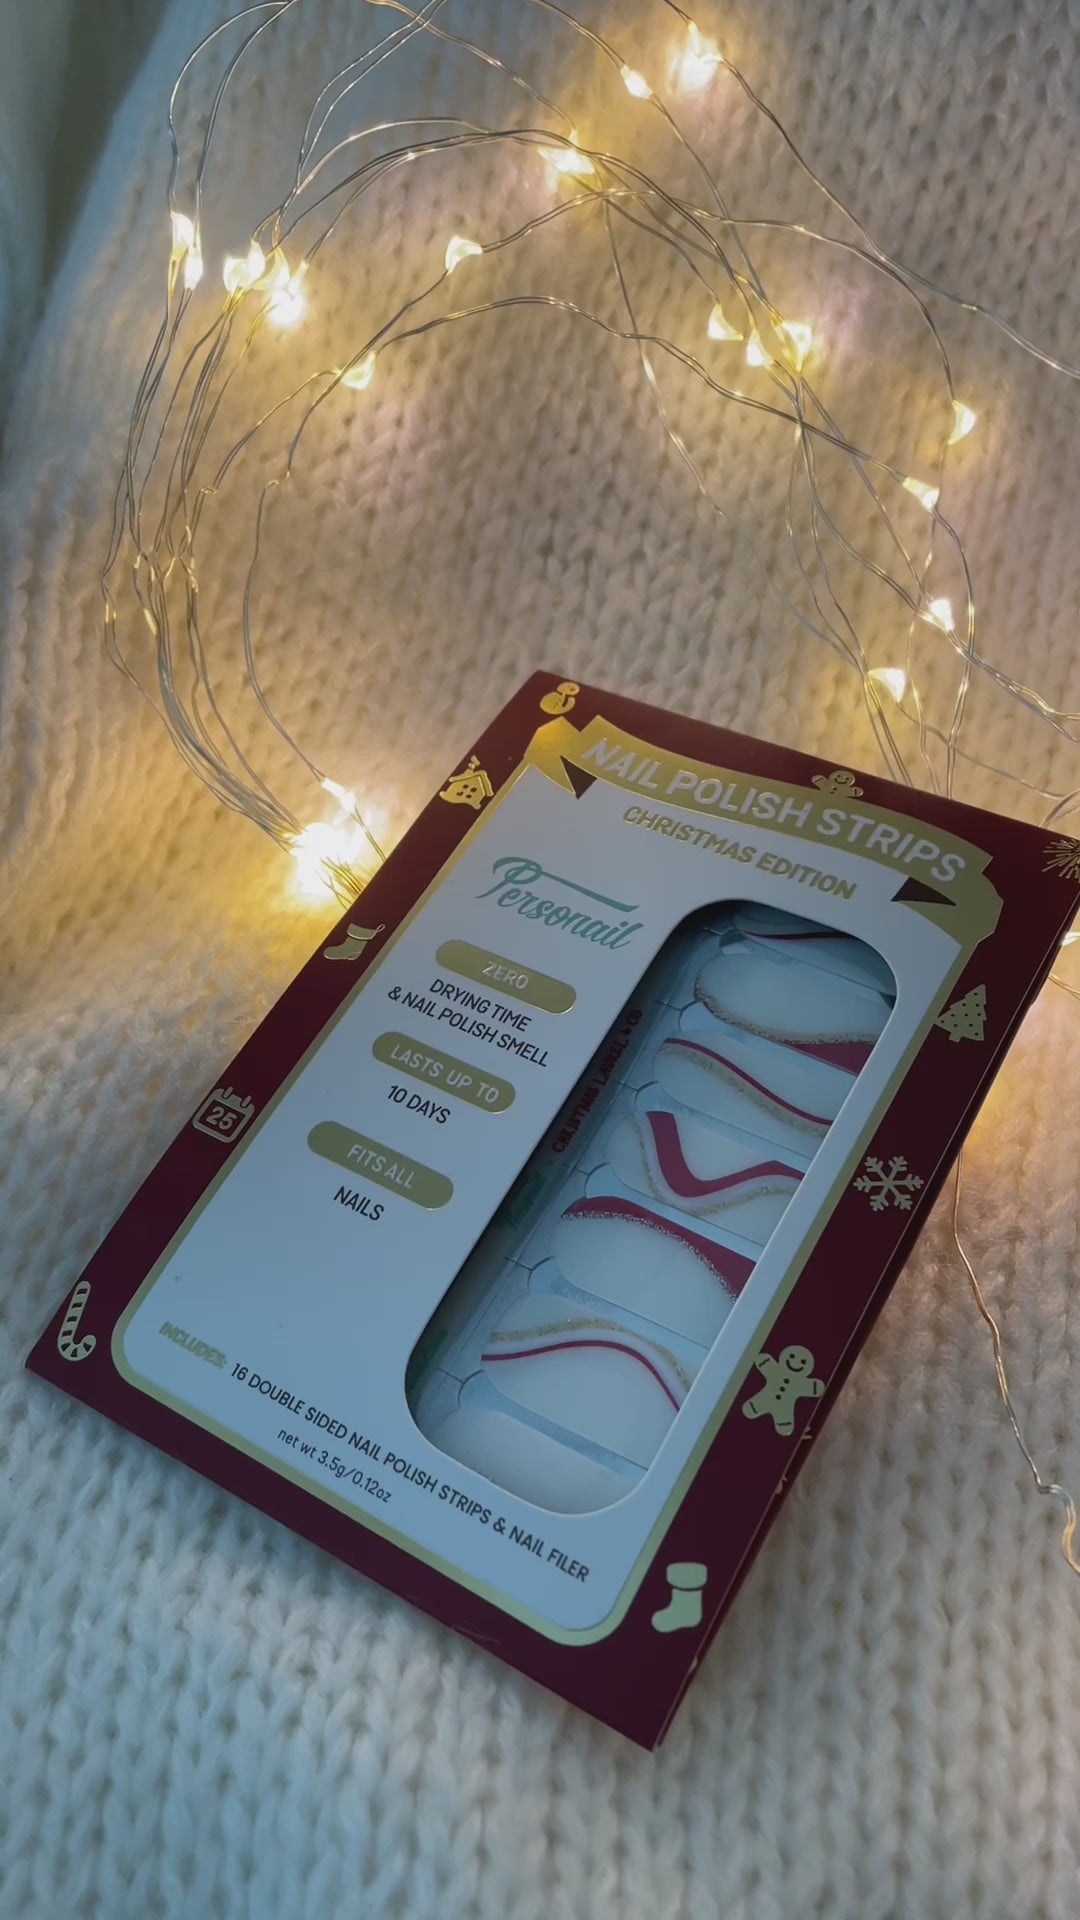 [COLLAB] Candy Cane Nail Wraps (NO PACKAGING) Christmas Nail Wrap